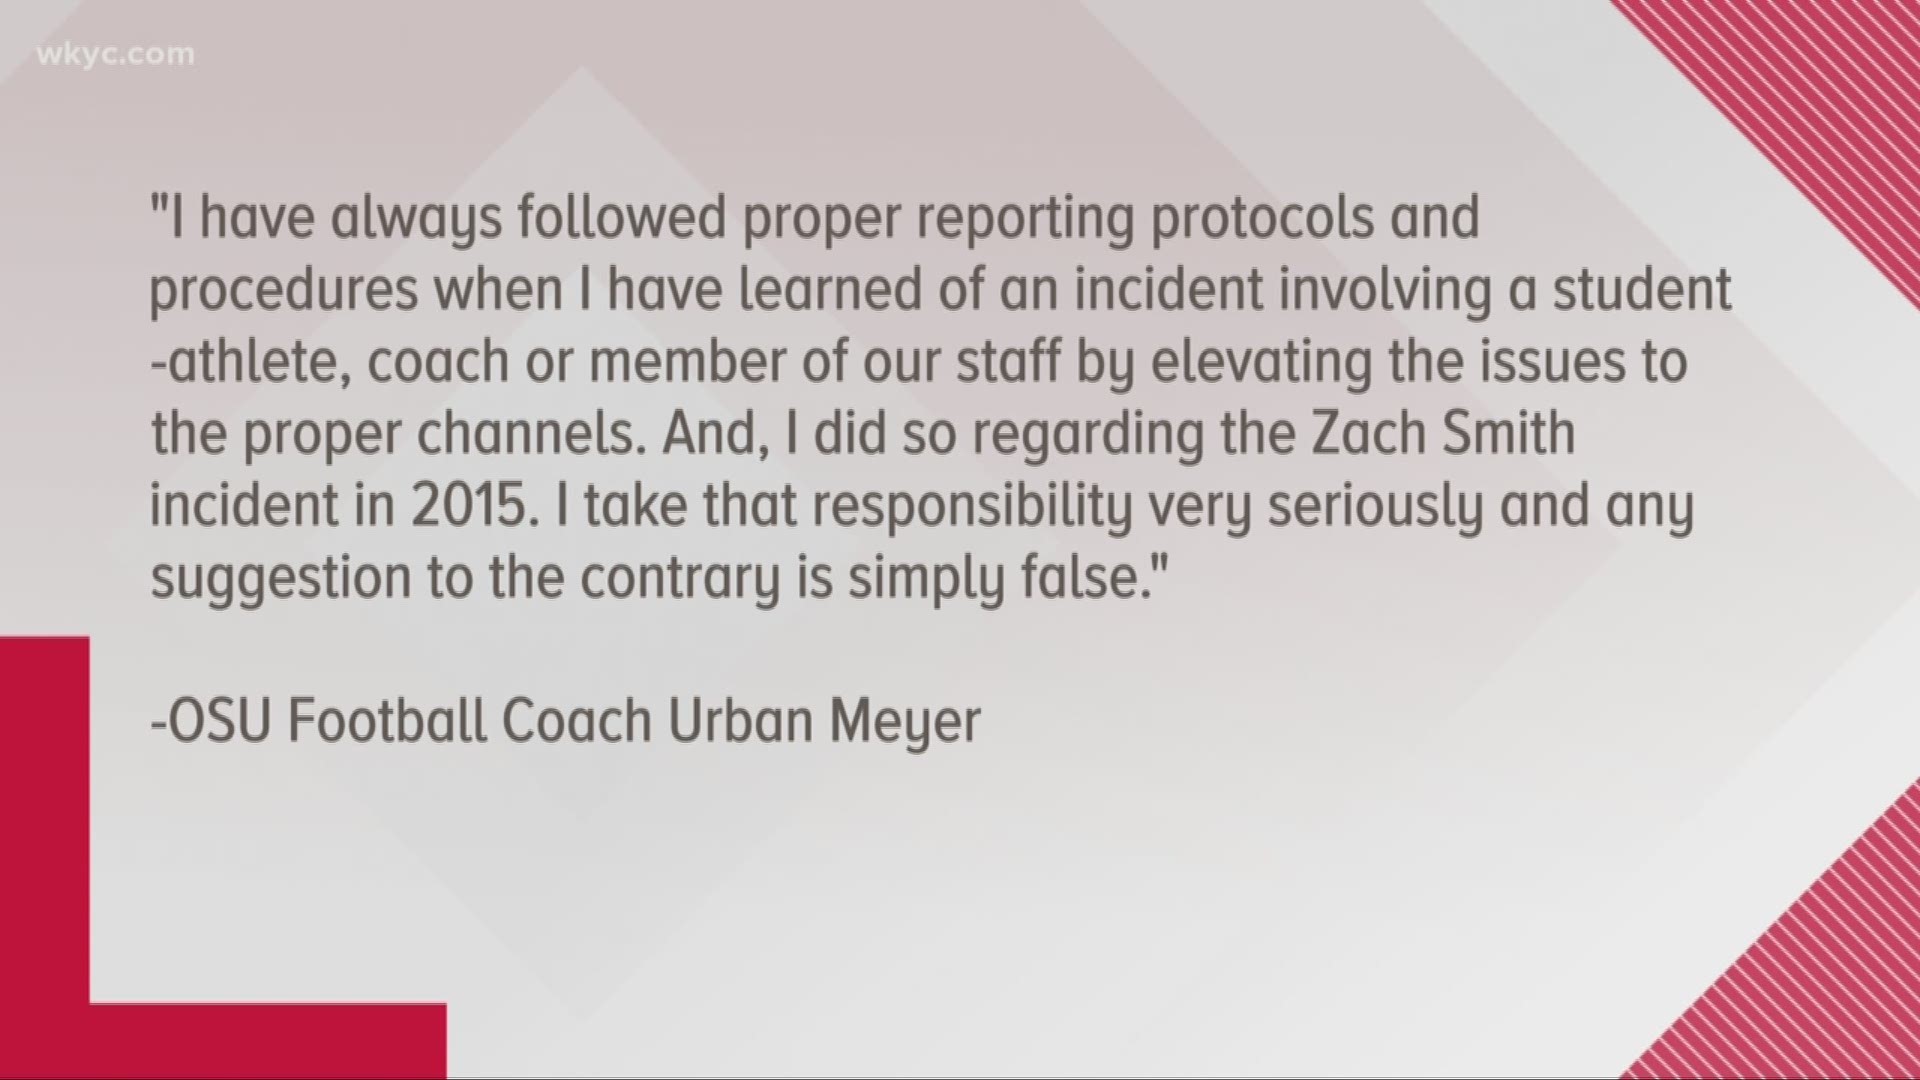 Urban Meyer admits he knew about 2015 domestic violence incident, reported it properly